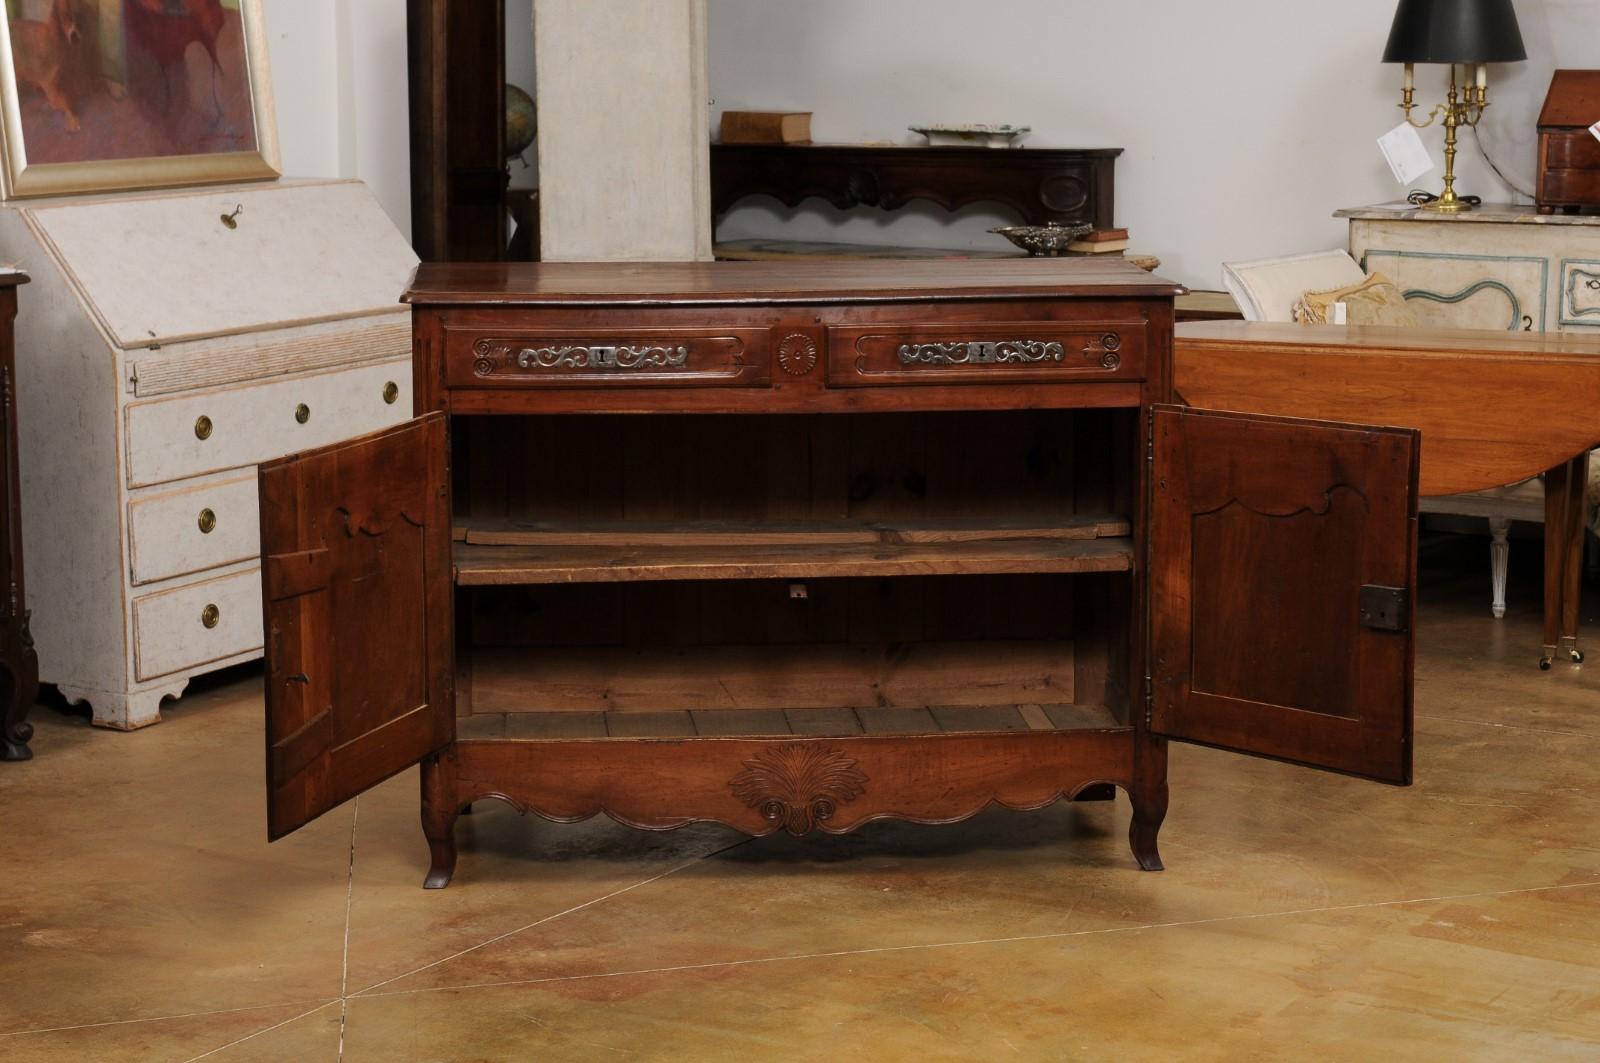 A French Louis XV style walnut buffet from the Mid-19th Century with two drawers, two carved doors and Rococo style hardware. Created in France during the 1850s, this walnut buffet showcases the stylistic characteristics of the King Louis XV era.